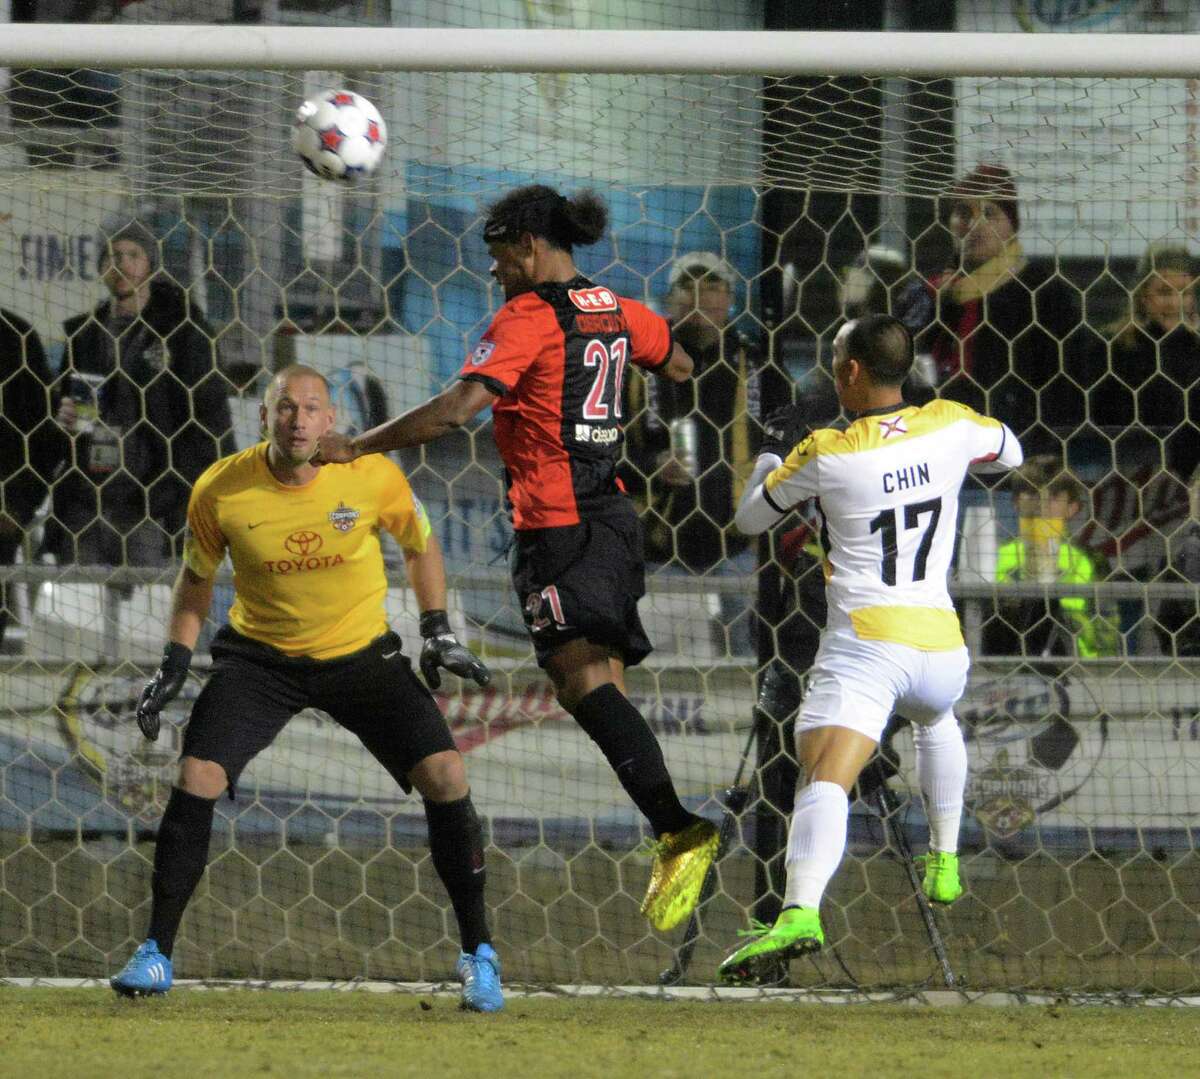 Stephen DeRoux (21) and goalkeeper Josh Saunders of the San Antonio Scorpions defend as Shawn Chin (17) of the Ft. Lauderdale Strikers attempts to get the ball in the net during the first half of the NASL Championship Final at Toyota Field on Saturday, Nov. 15, 2014.